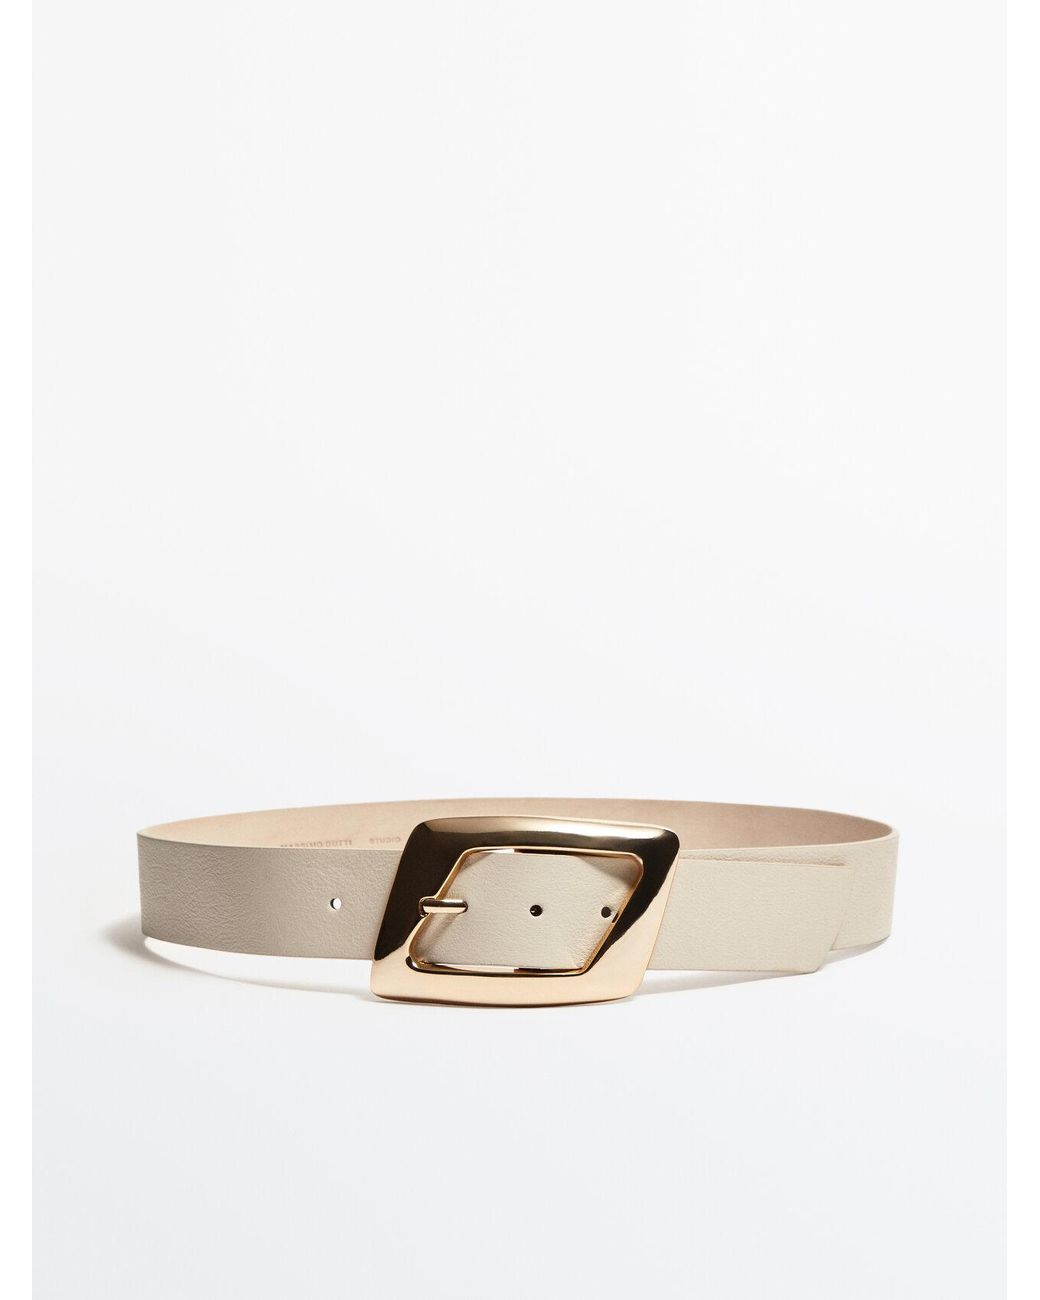 MASSIMO DUTTI Belt With Wide Buckle - Studio in Natural | Lyst